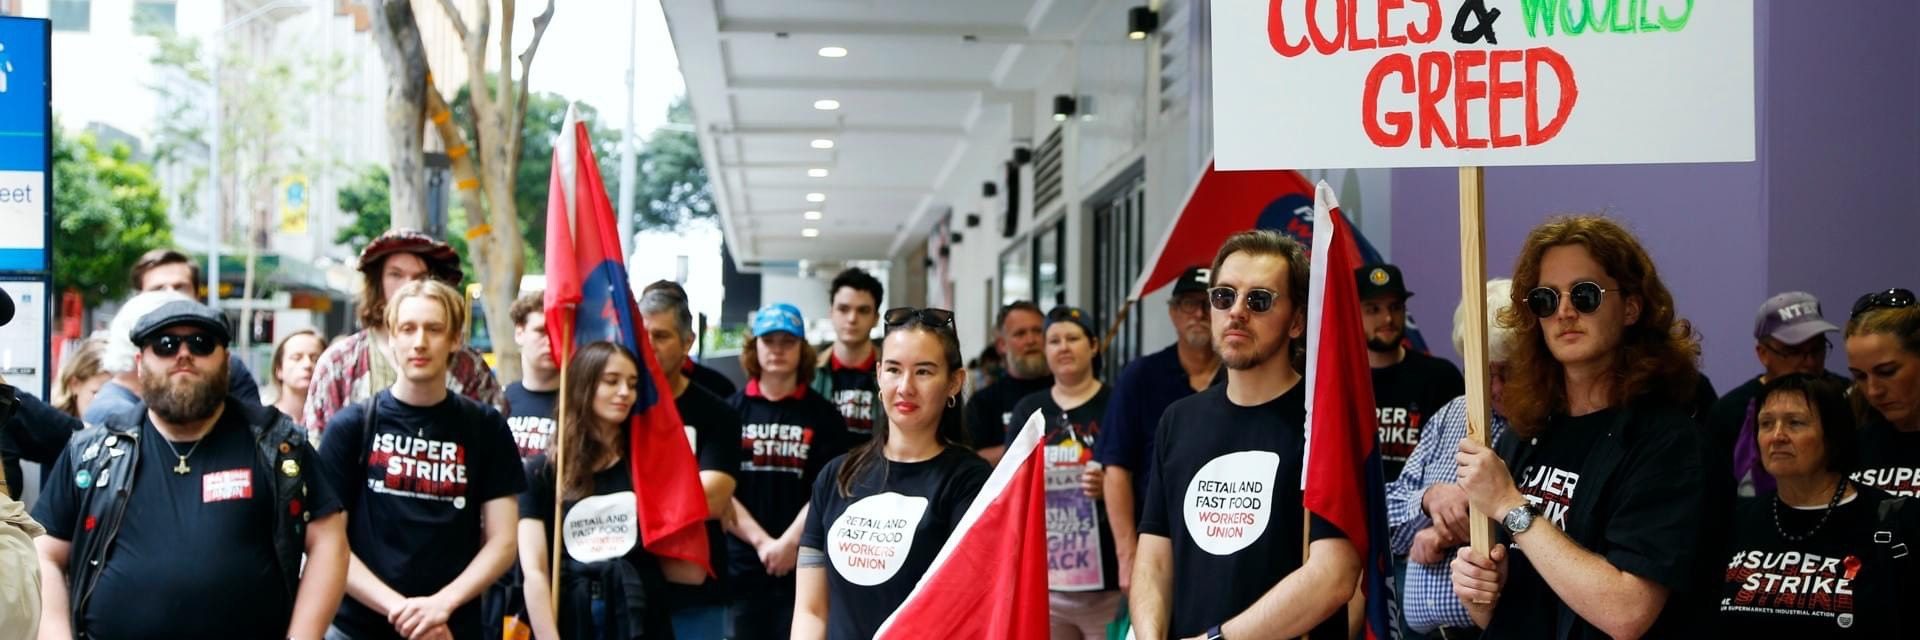 Coles and Woolworths workers went on strike this weekend for better pay an working conditions.